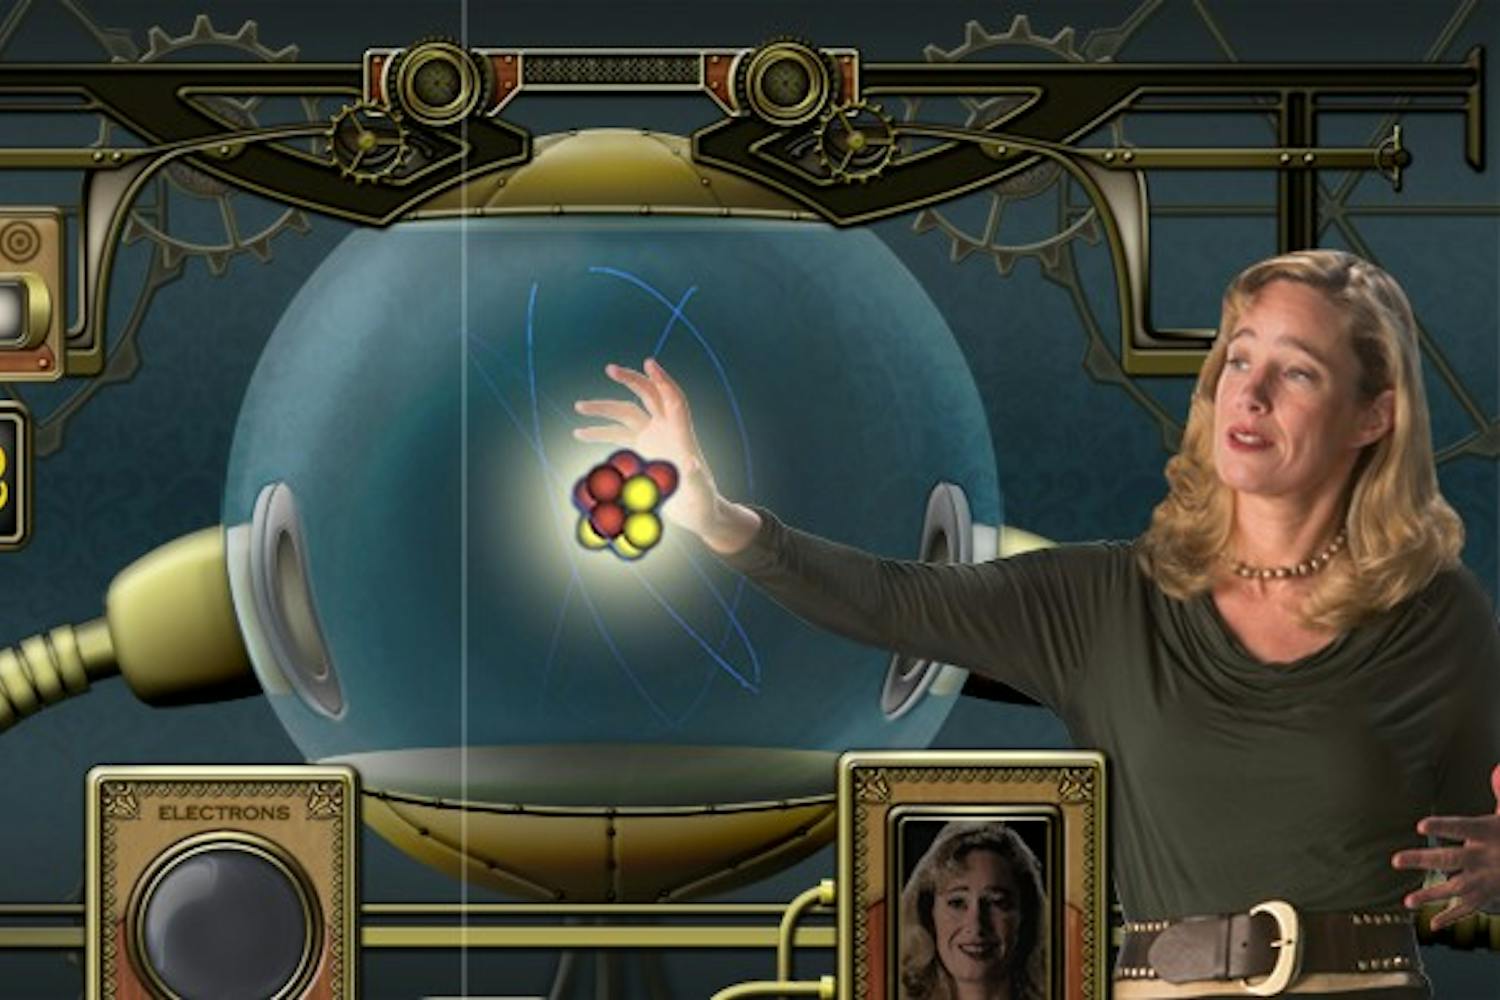 ASU psychology research professor and founder of Embodied Games Mina C. Johnson-Glenburg appears in a 2014 mock-up of what it looks like to play the game&nbsp;"Electron Counter."